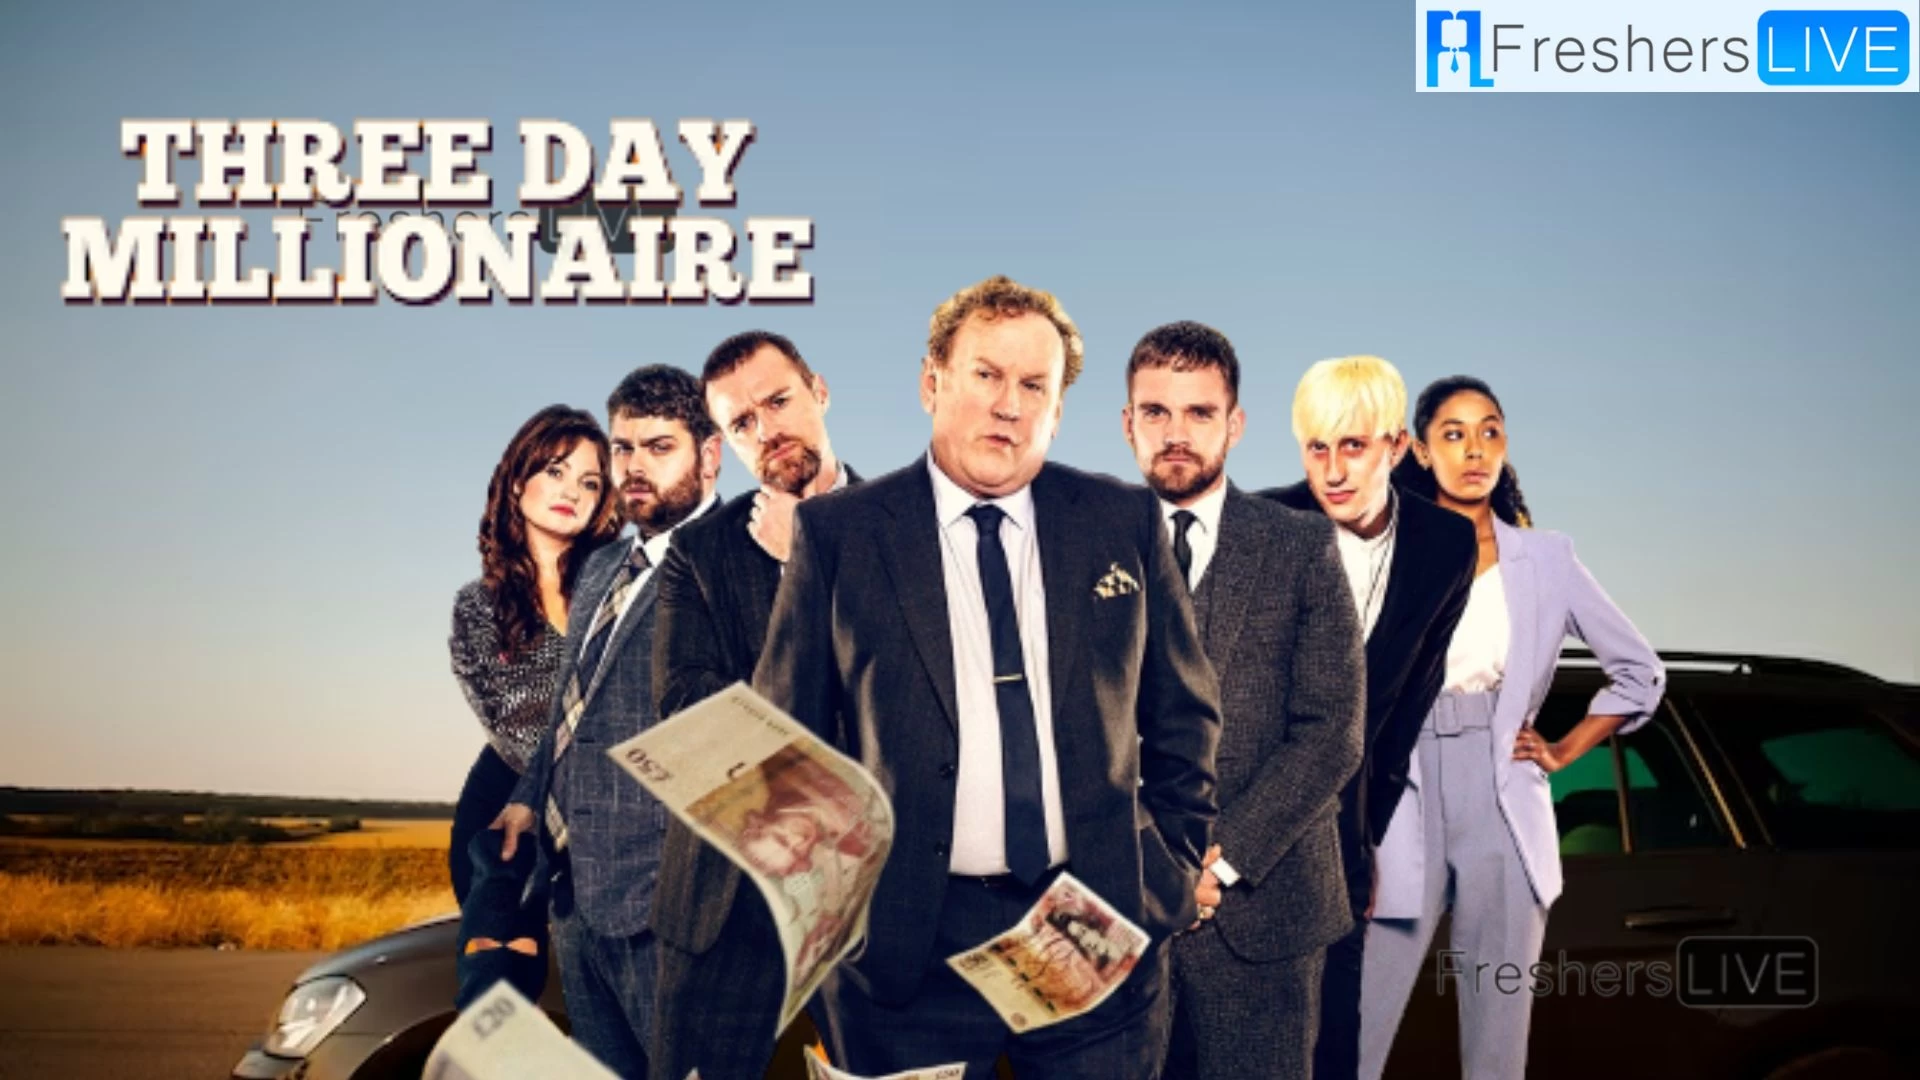 Is Three Day Millionaire Based On a True Story? Three Day Millionaire Plot, Cast, and Trailer